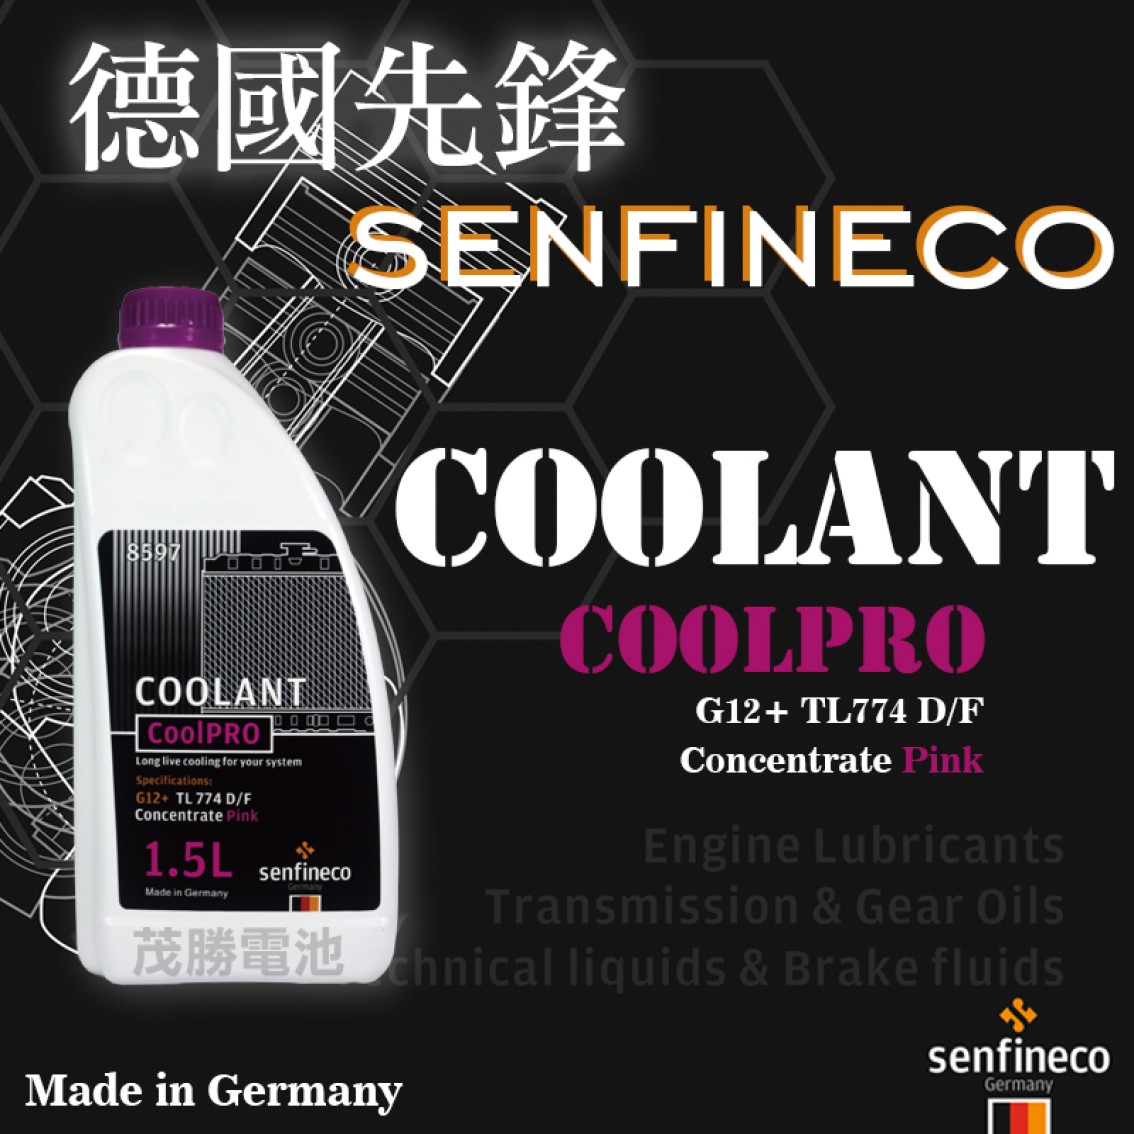 CoolPRO Coolant